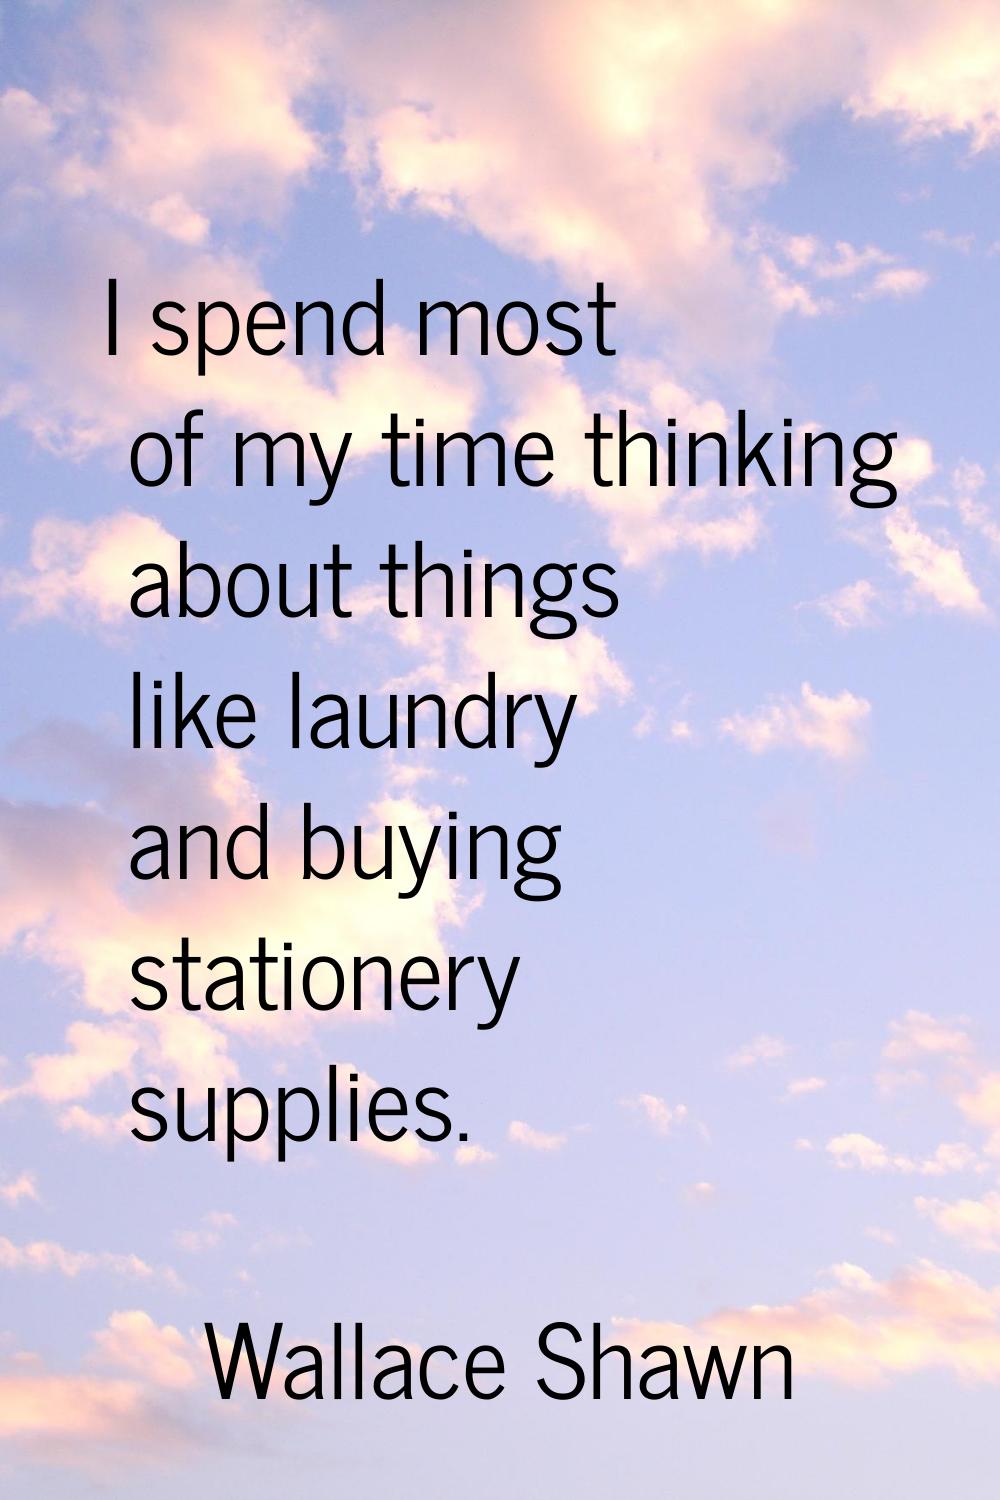 I spend most of my time thinking about things like laundry and buying stationery supplies.